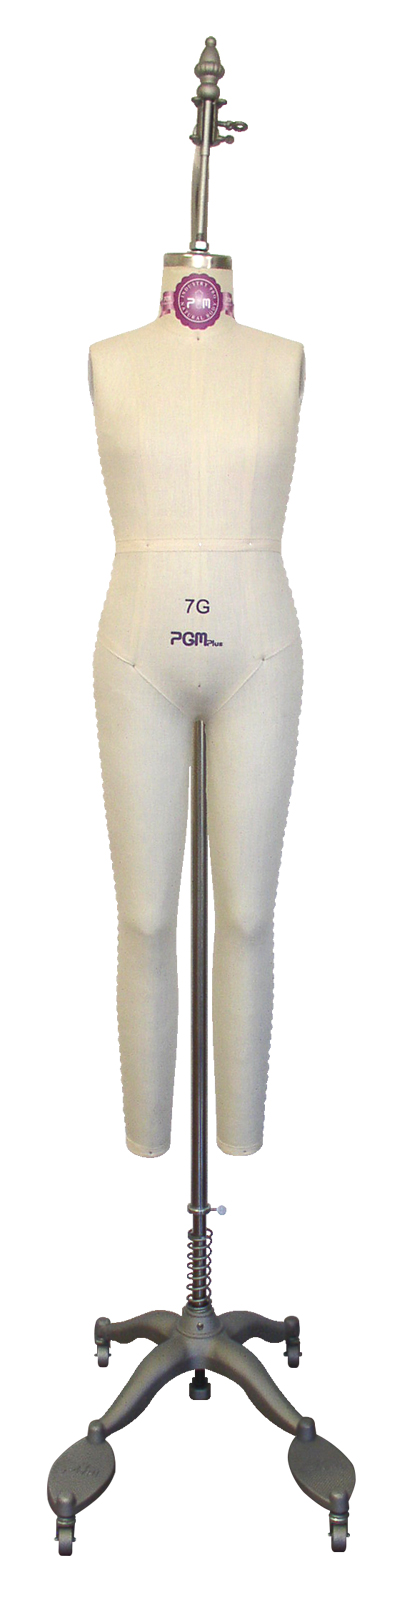 PGM Girls Full Body Form (613A - Size 7G to 10G)